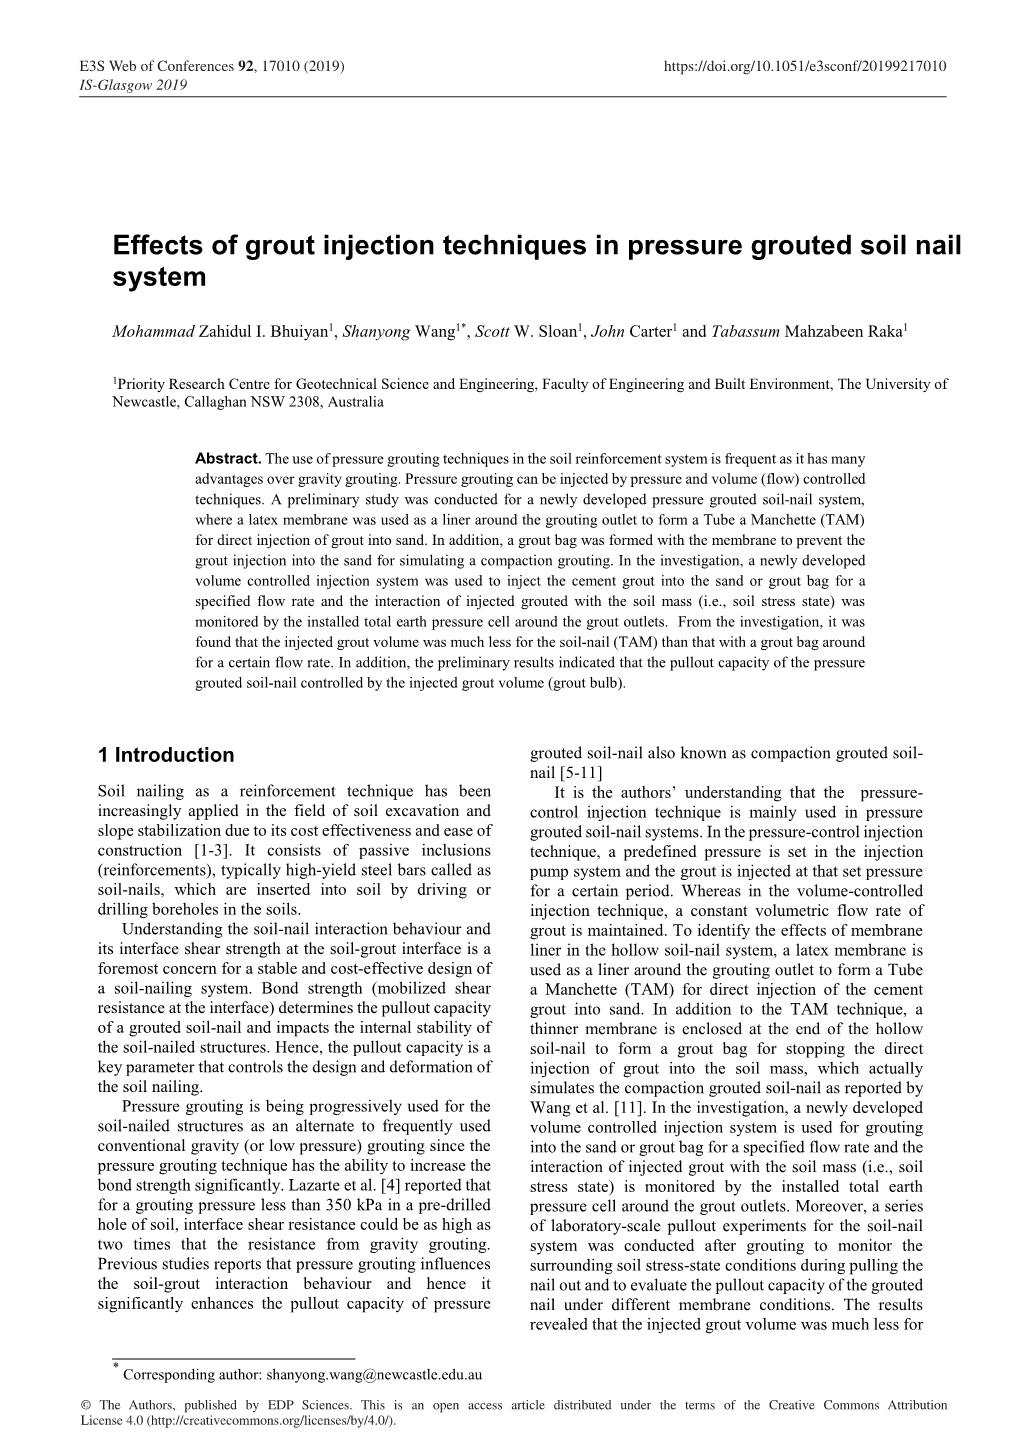 Effects of Grout Injection Techniques in Pressure Grouted Soil Nail System